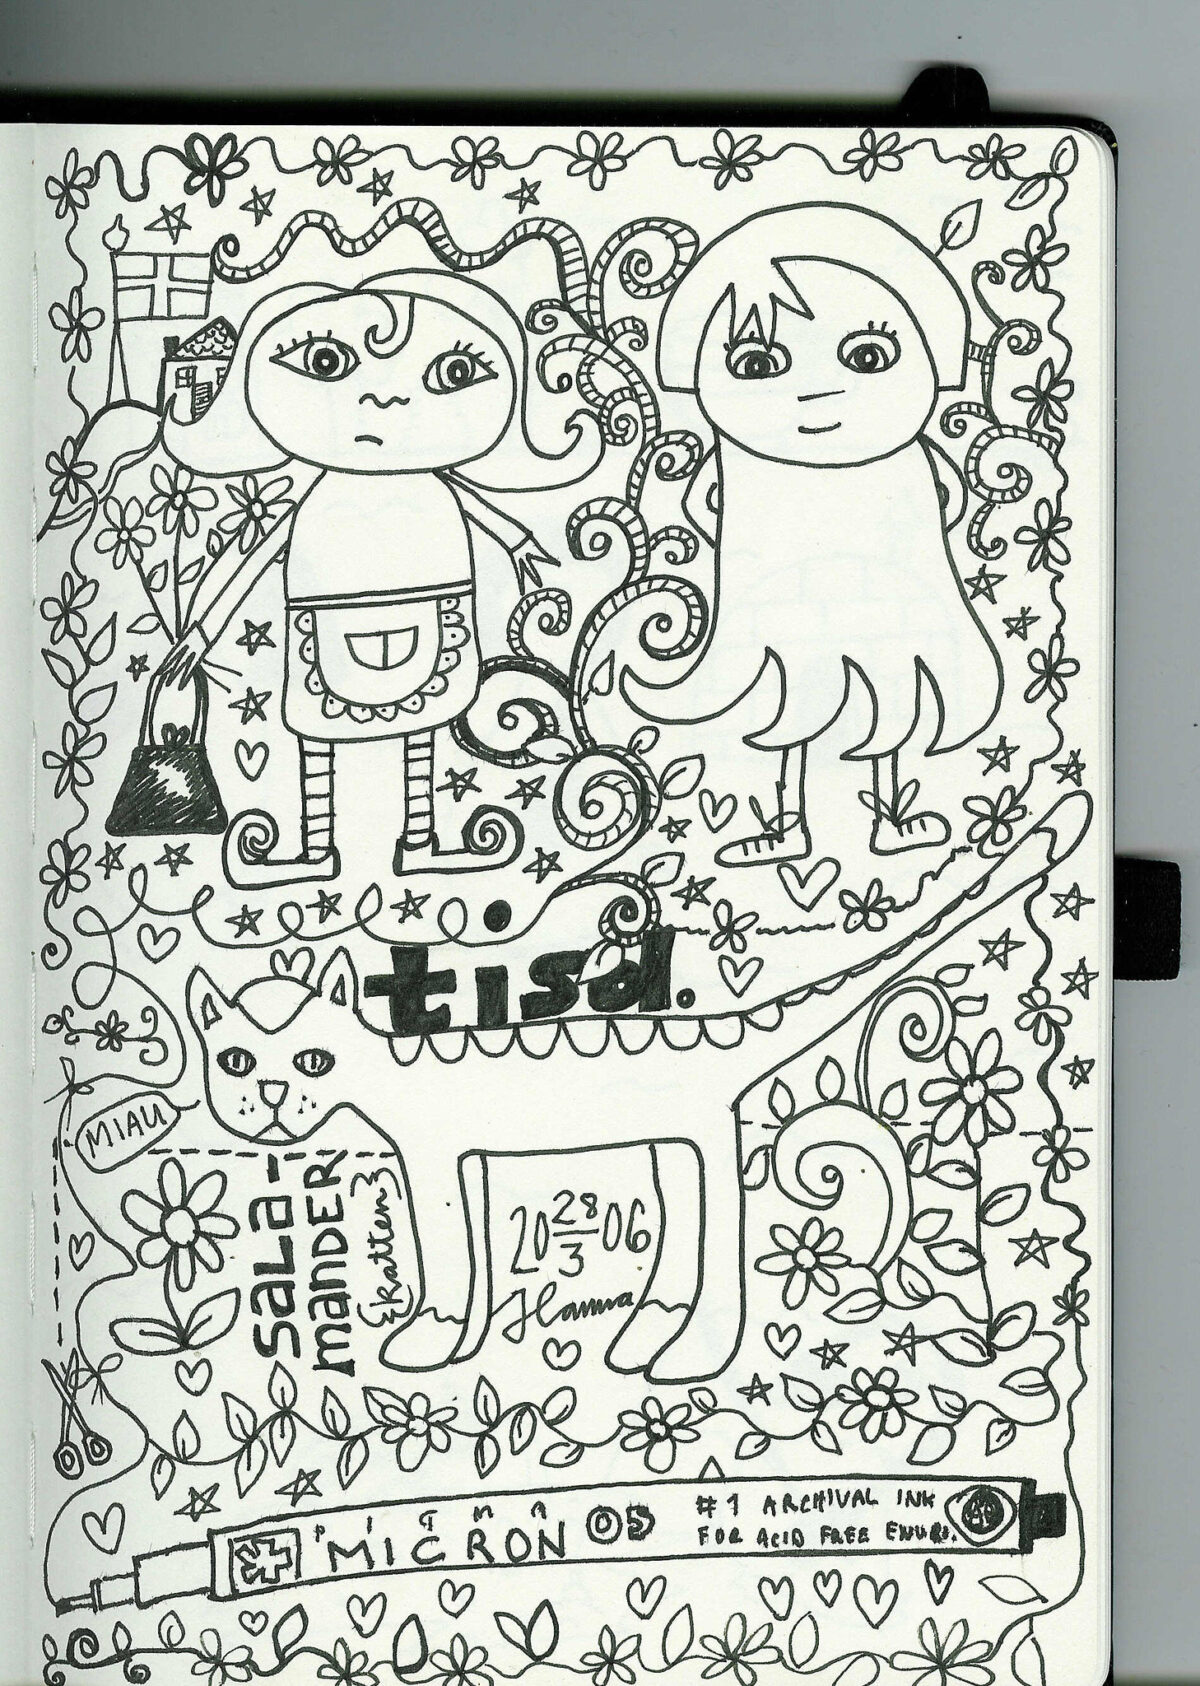 Doodles from class 2006 by Hanna Andersson, all rights reserved